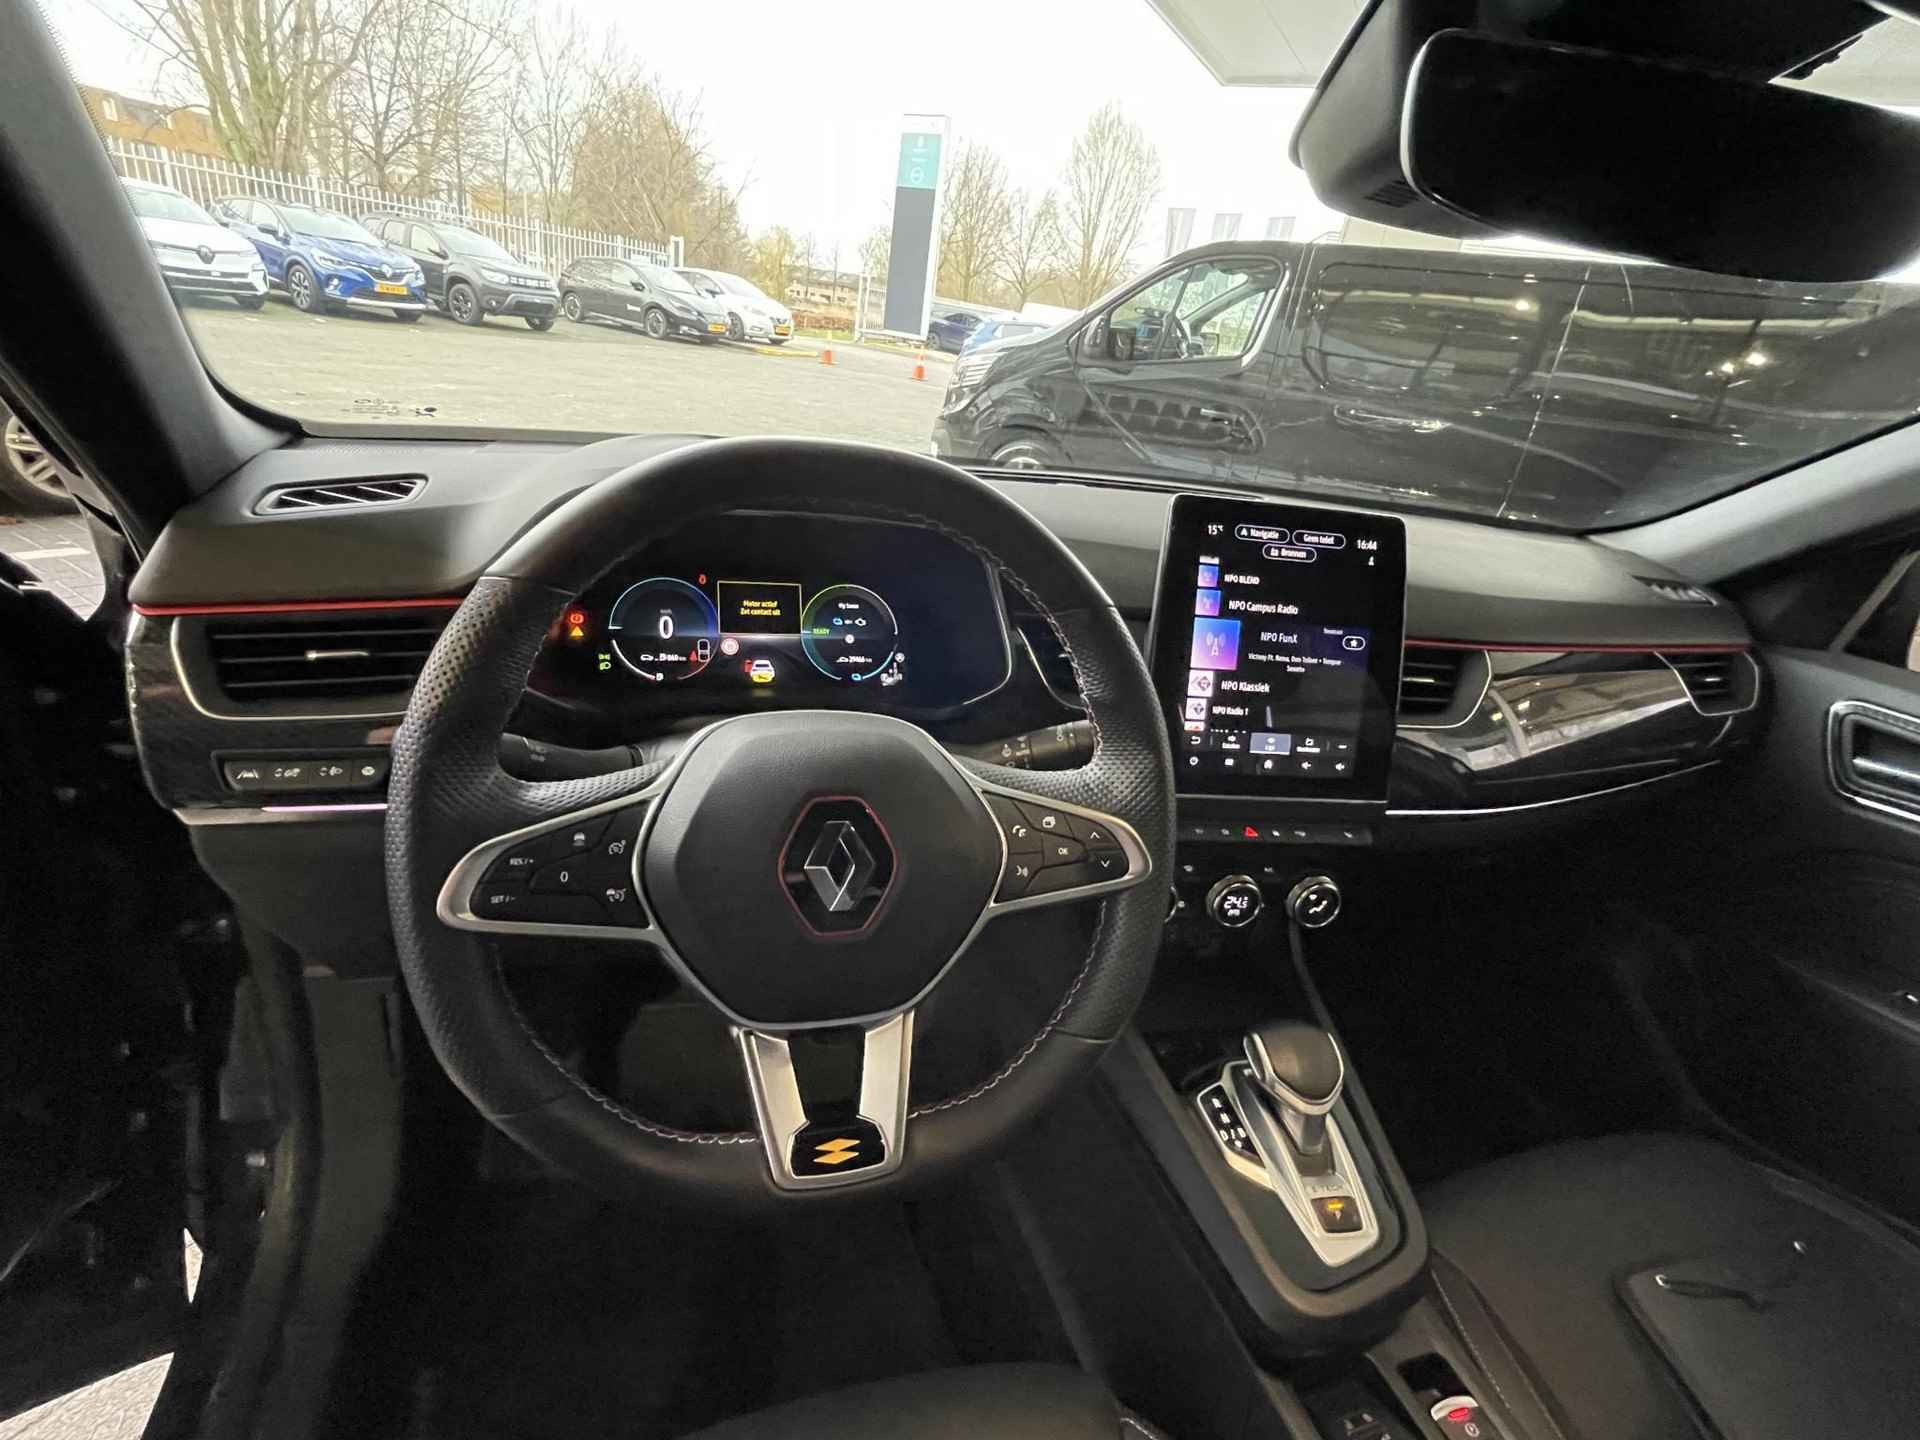 Renault Arkana 1.6 E-Tech Hybrid 145 R.S. Line Automaat / Cruise / Clima / Full LED / Navigatie / Camera / PDC / Bose Sound systeem - 15/33